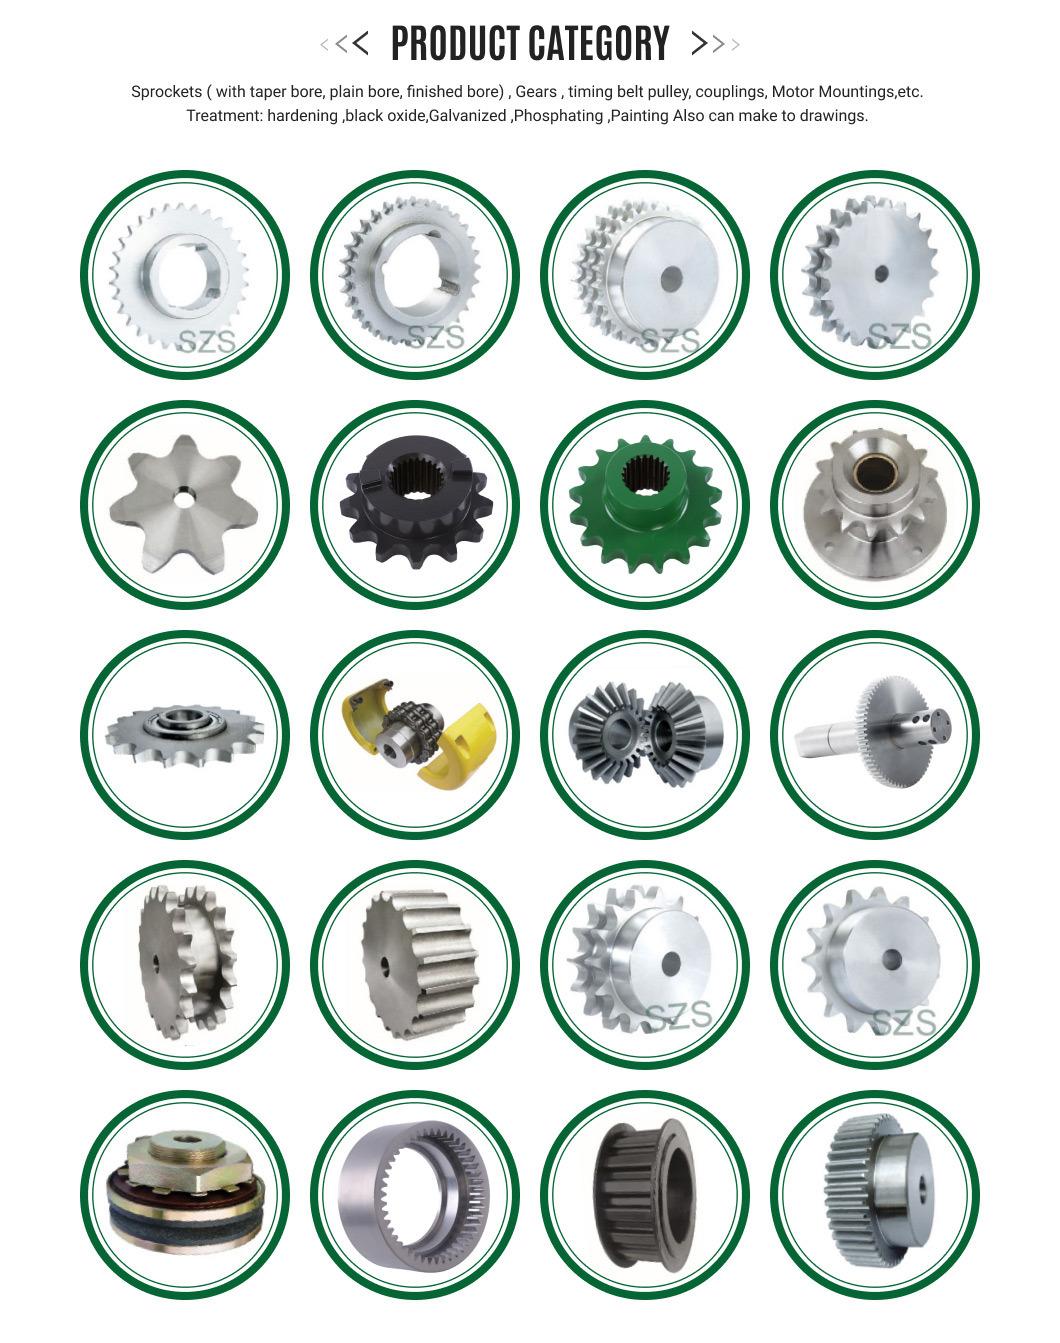 Idler Sprocket: Ball Bearing, Plate Wheel, ID06A, ID08A, ID10A, ID12A, ID16A, ID20A(Standard America,Europen, ANSI Standard or made to drawing) Transmisson part